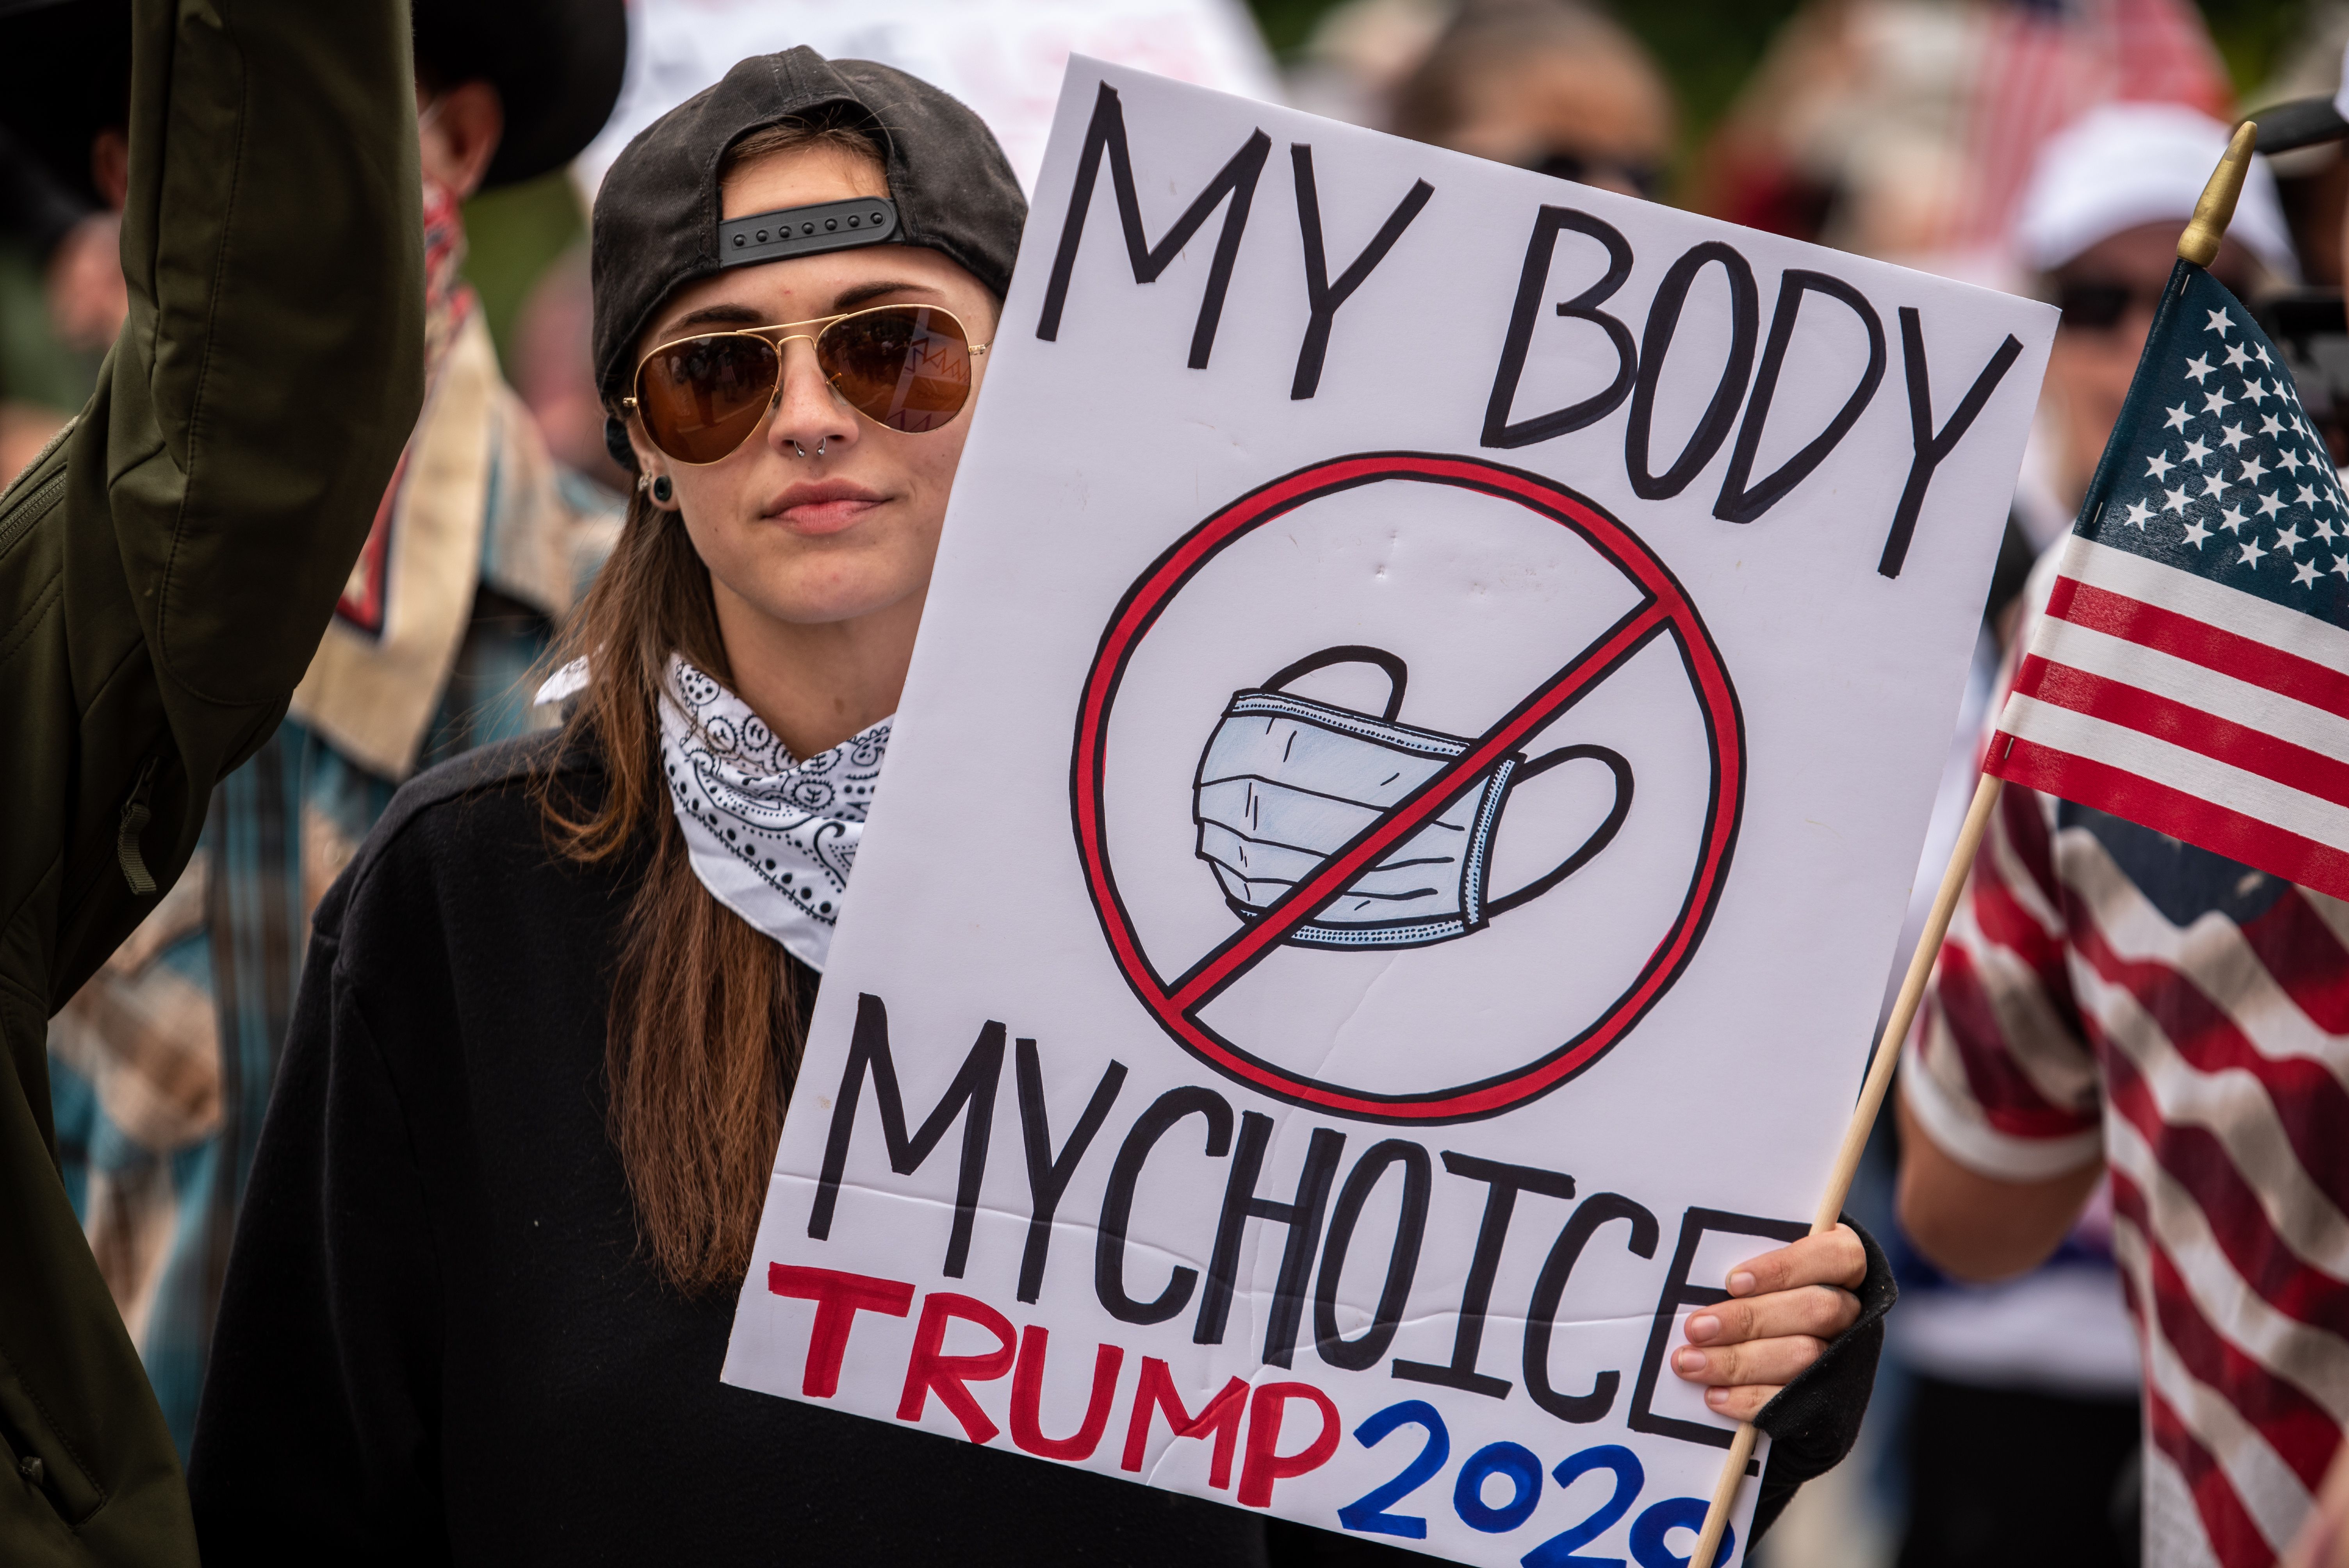 In this image, a woman holds a sign that reads "My body my choice" with a drawing of a face mask crossed out